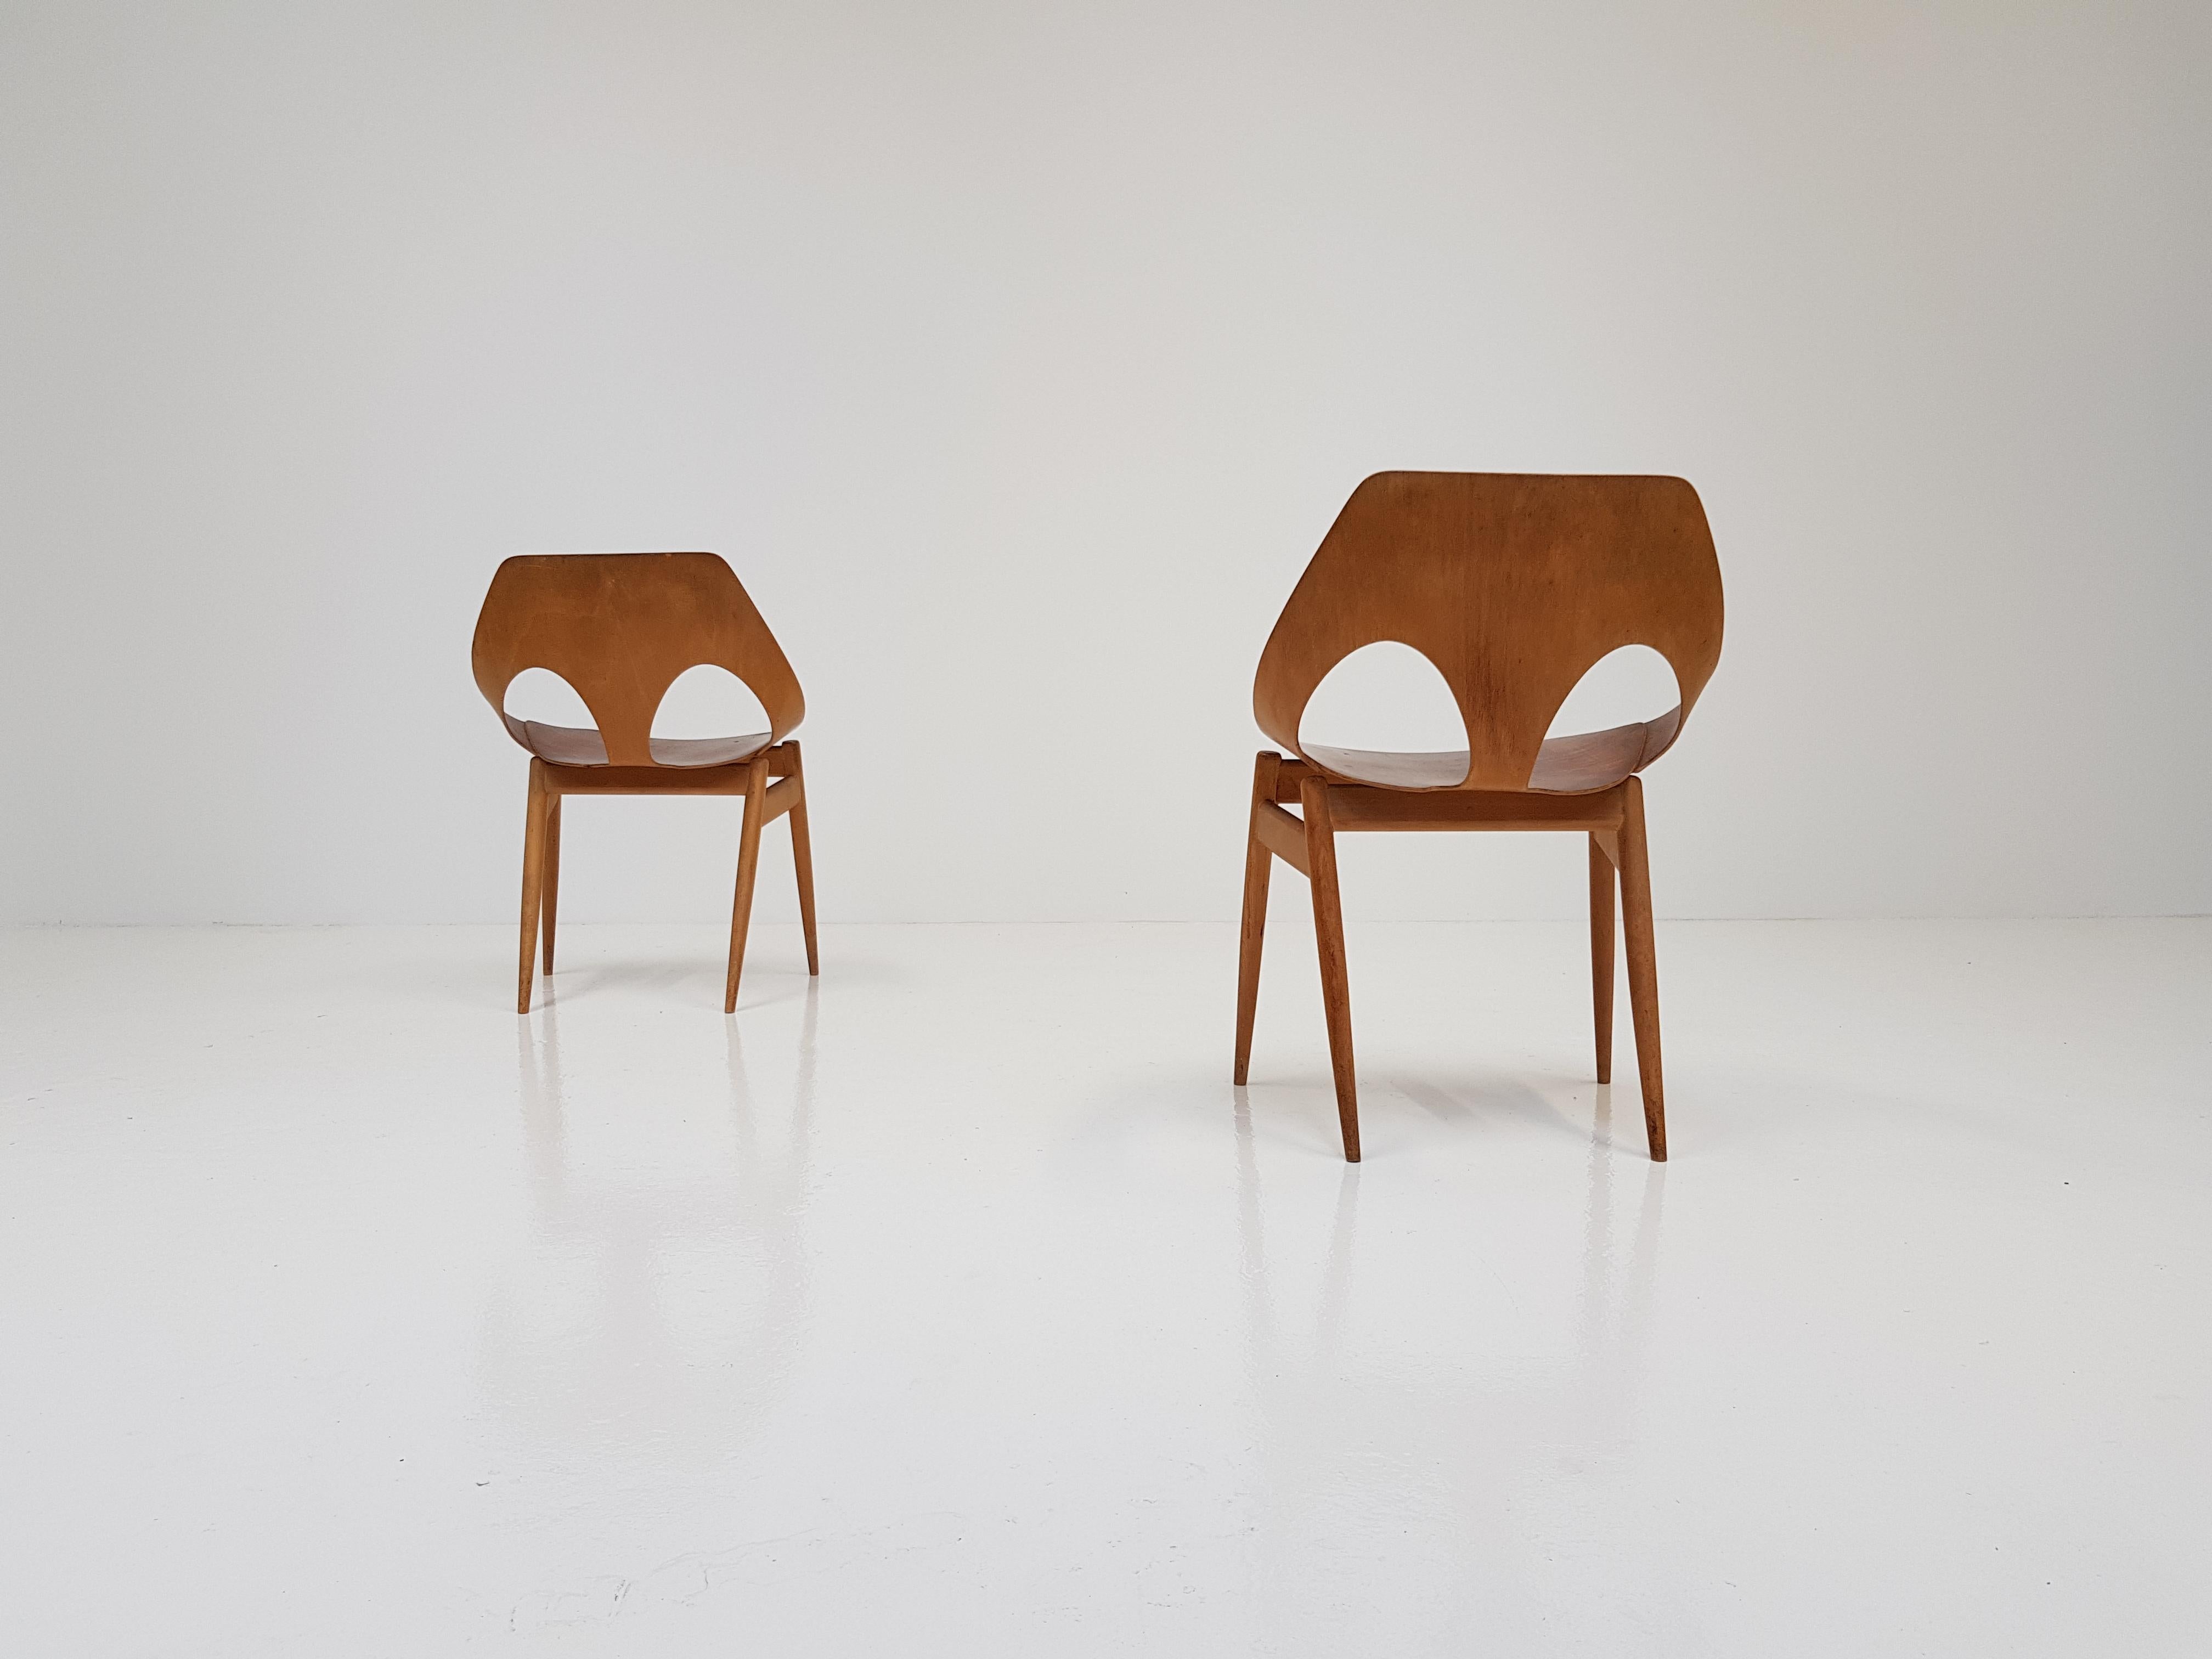 Pair of Carl Jacobs & Frank Guille Designed 'Jason' Chairs for Kandya, 1950s In Good Condition In London Road, Baldock, Hertfordshire